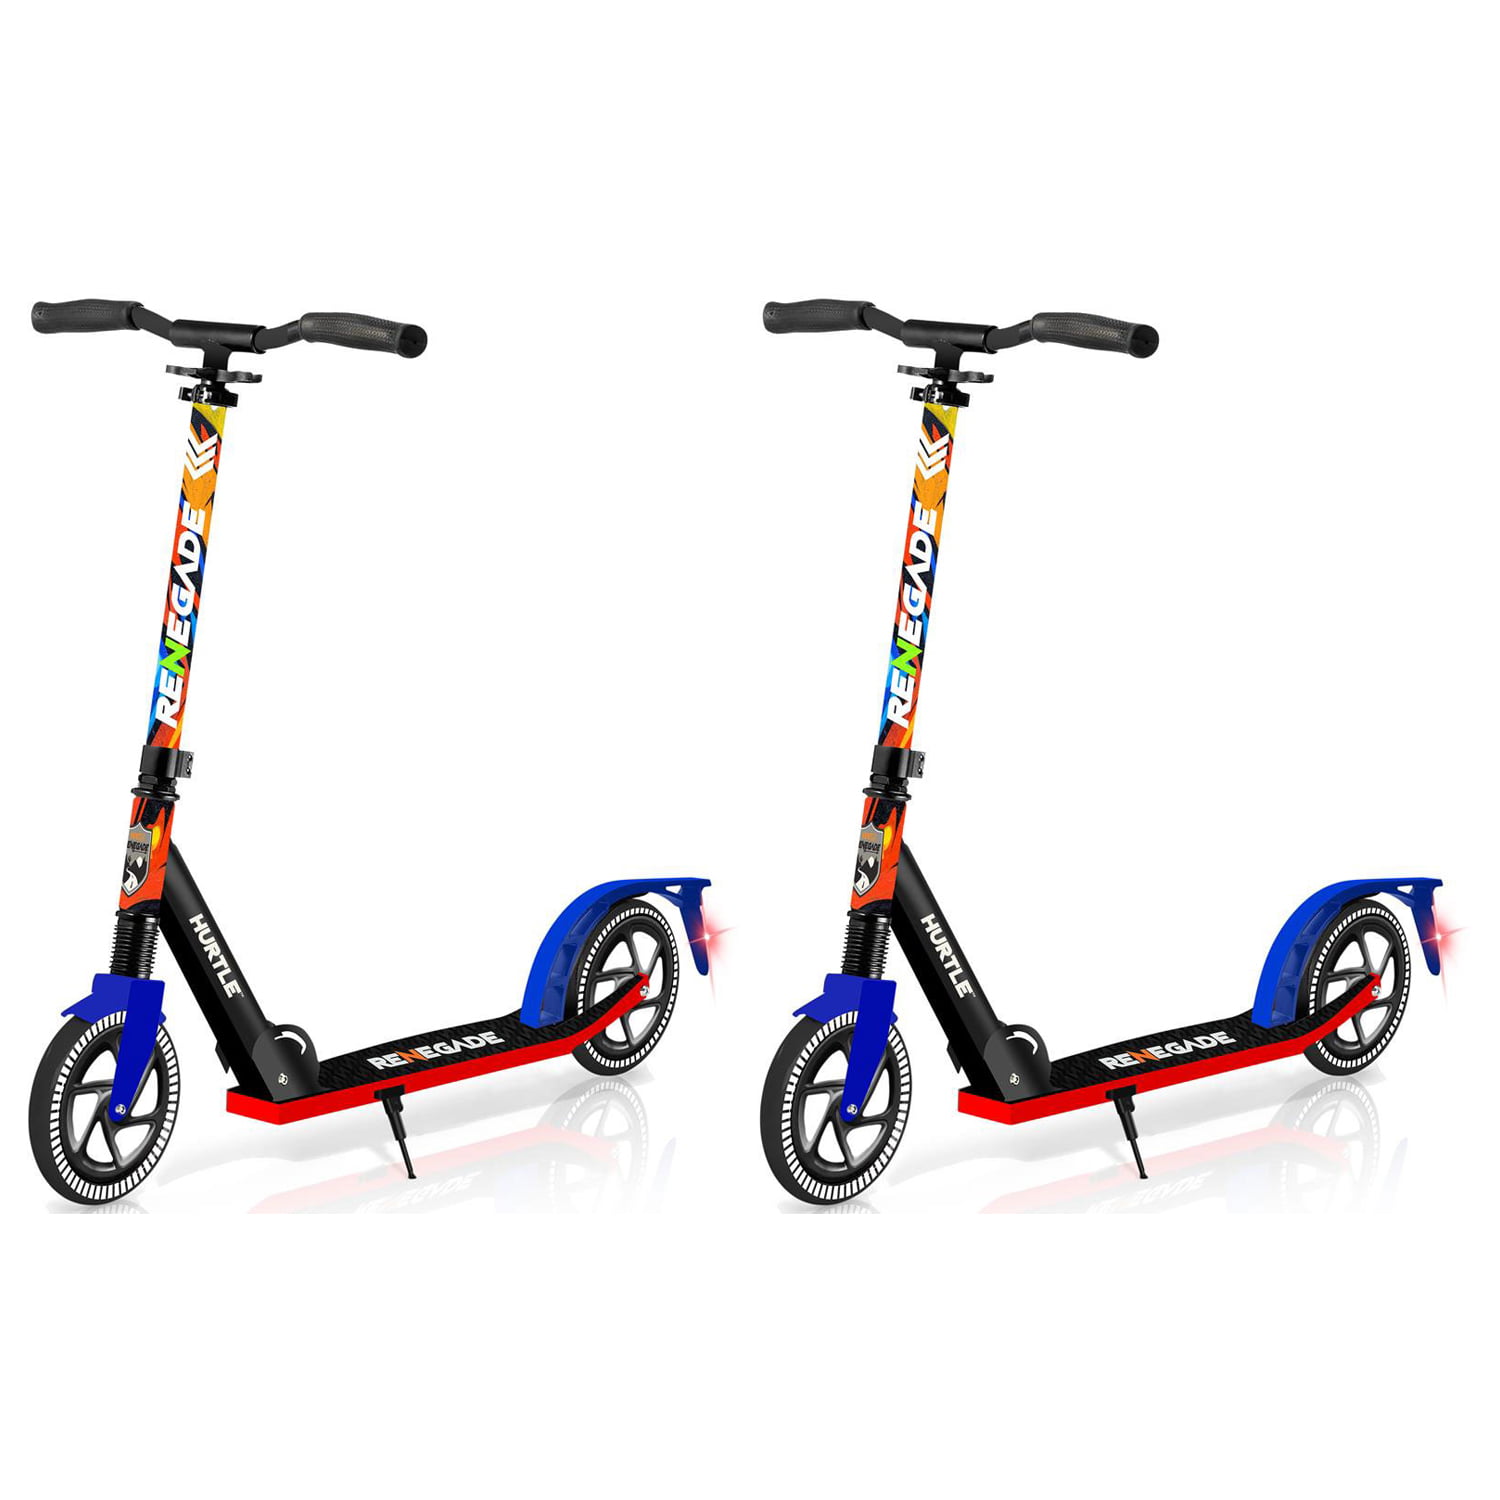 2 Wheel Scooter with Adjustable T-Bar Handlebar Kick Scooter Hurtle Scooter Scooter for Teenager Folding Adult Kick Scooter with Alloy Anti-Slip Deck